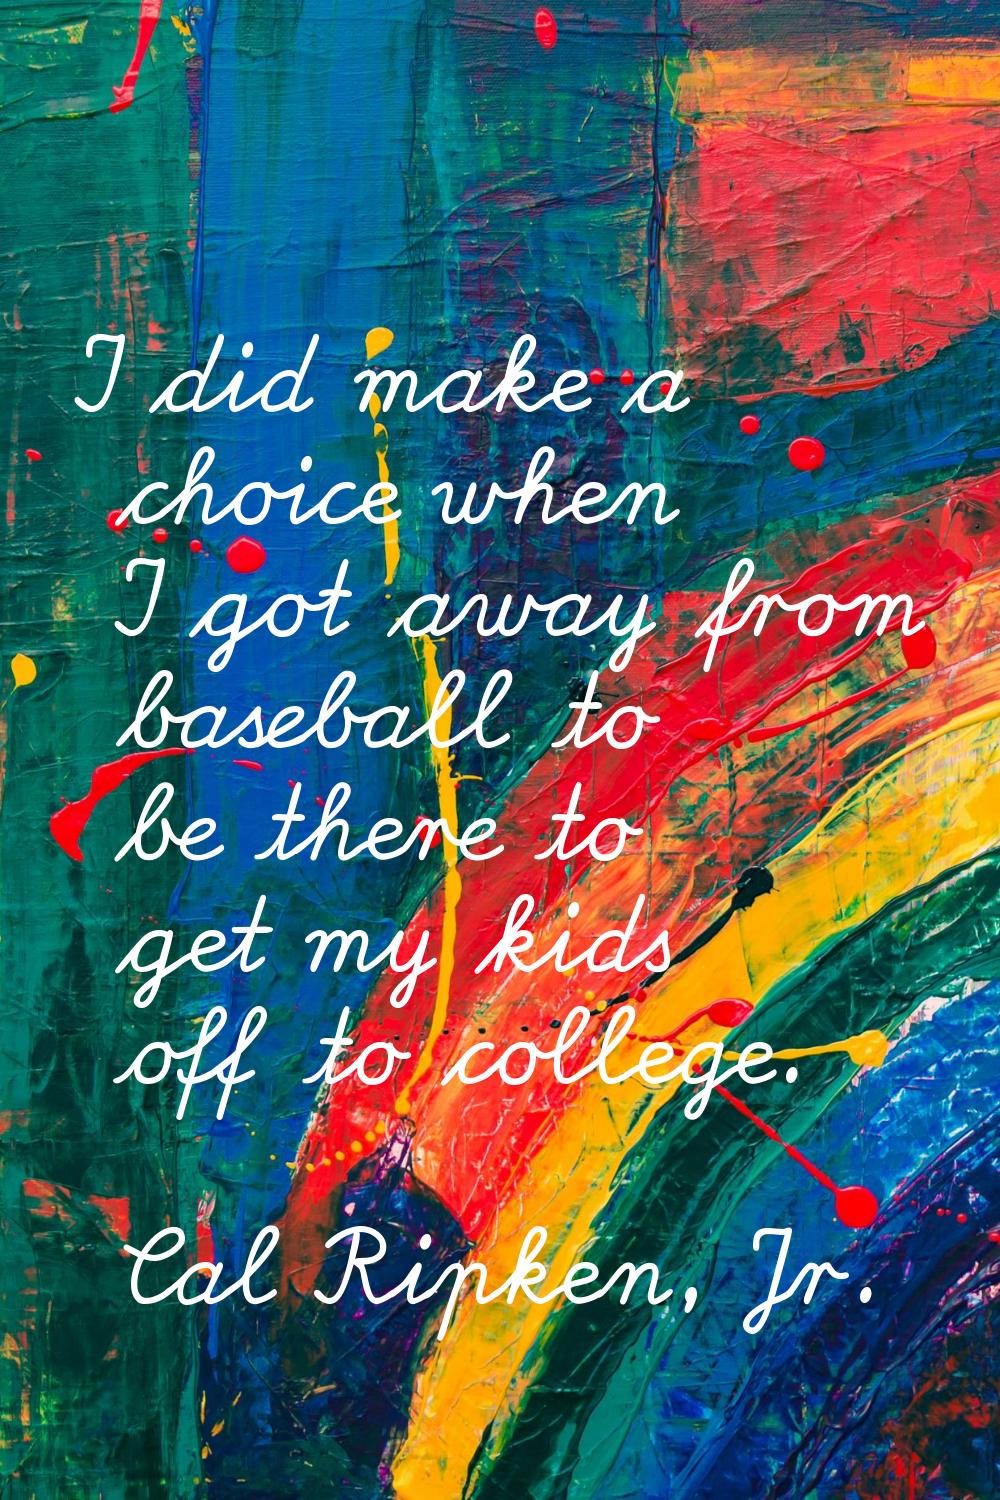 I did make a choice when I got away from baseball to be there to get my kids off to college.